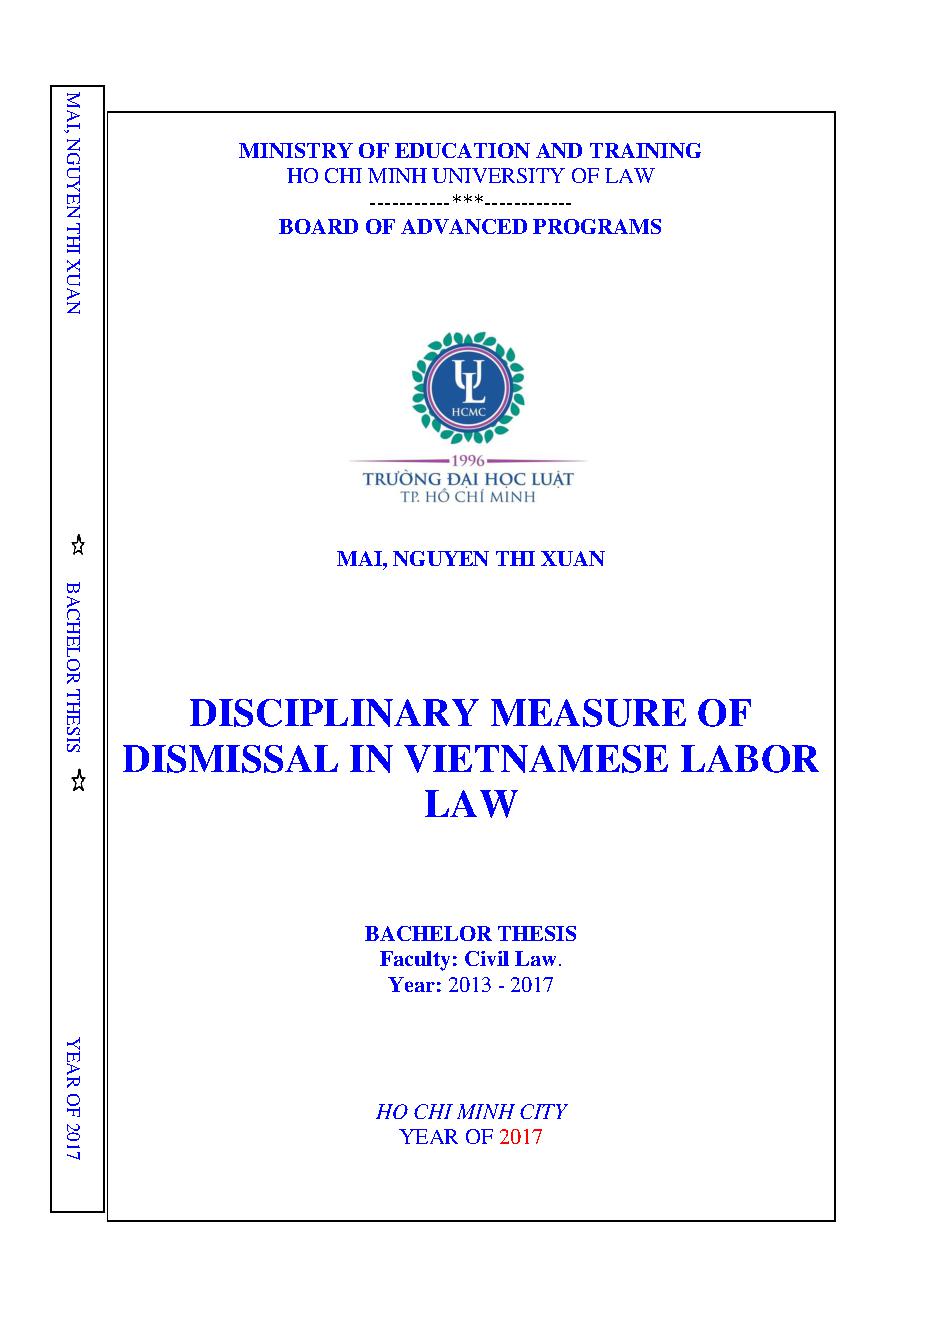 Disciplinary measure of dismissal in Vietnamese labor law